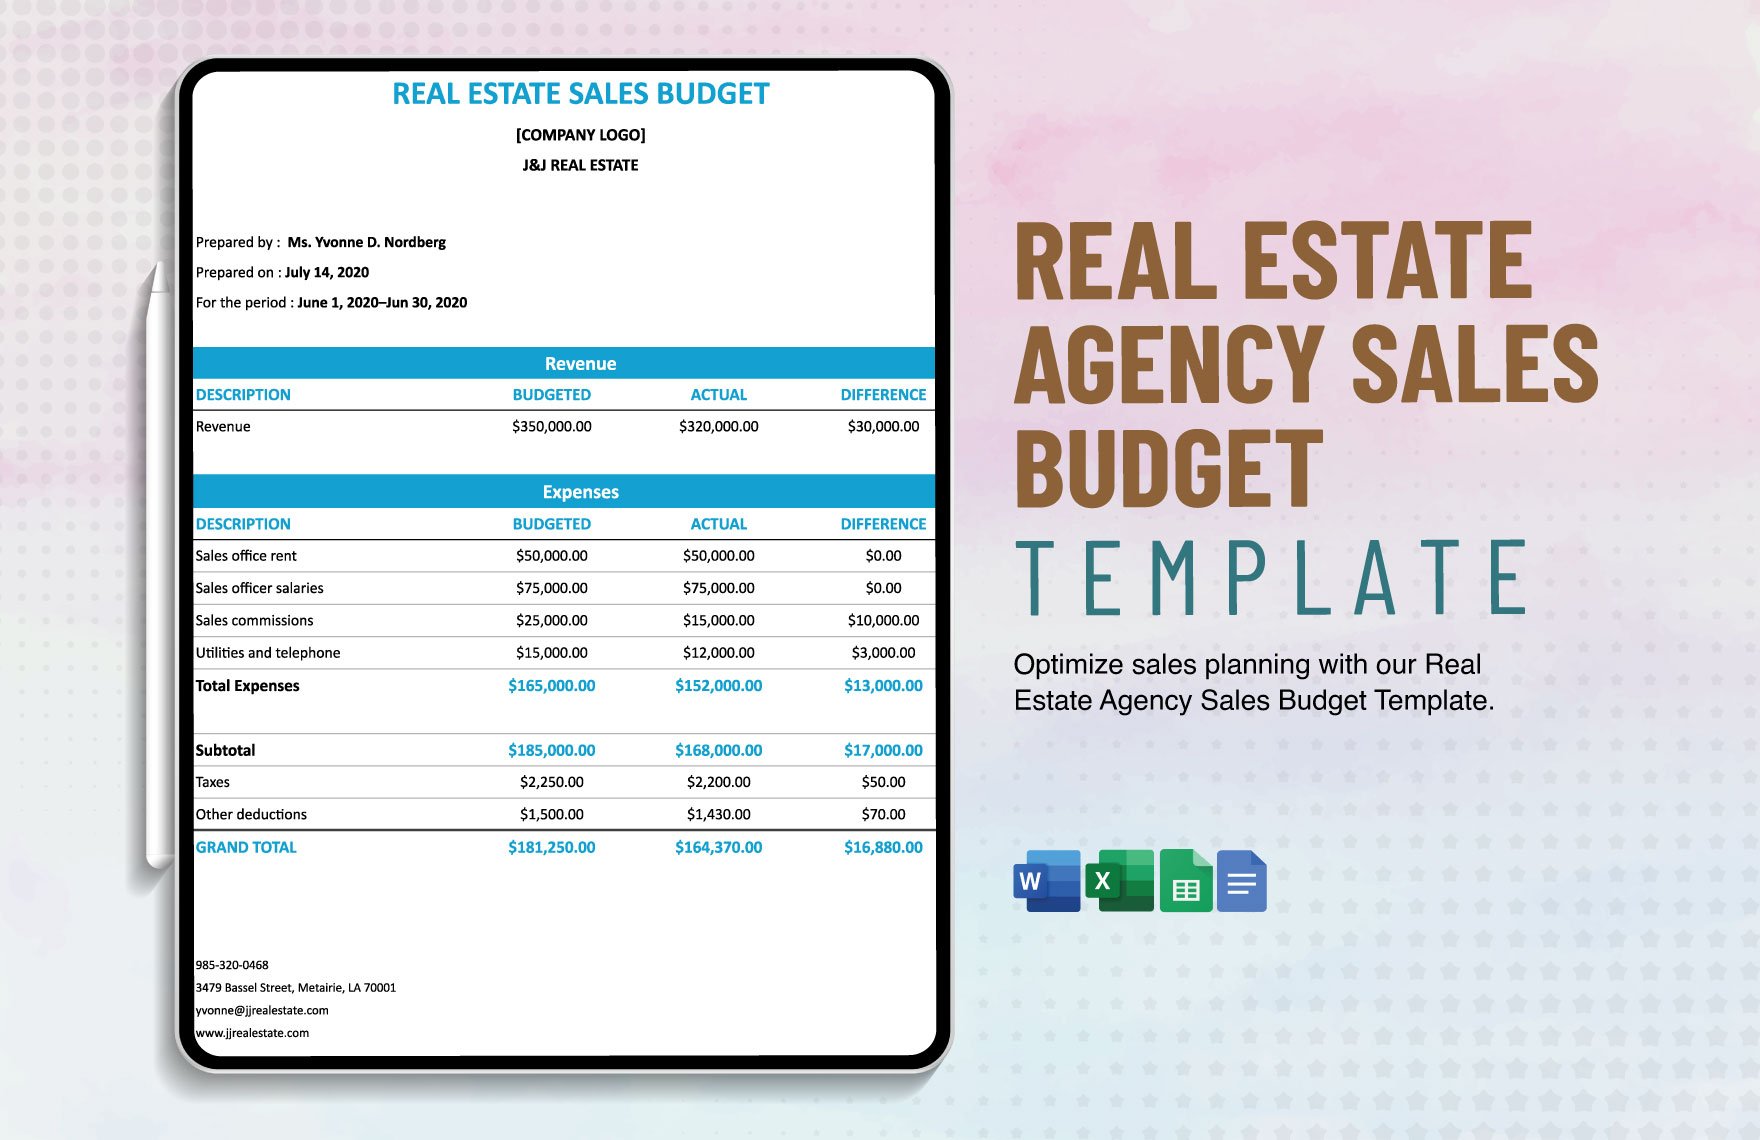 Real Estate Agency Sales Budget Template in Word, Google Docs, Excel, Google Sheets